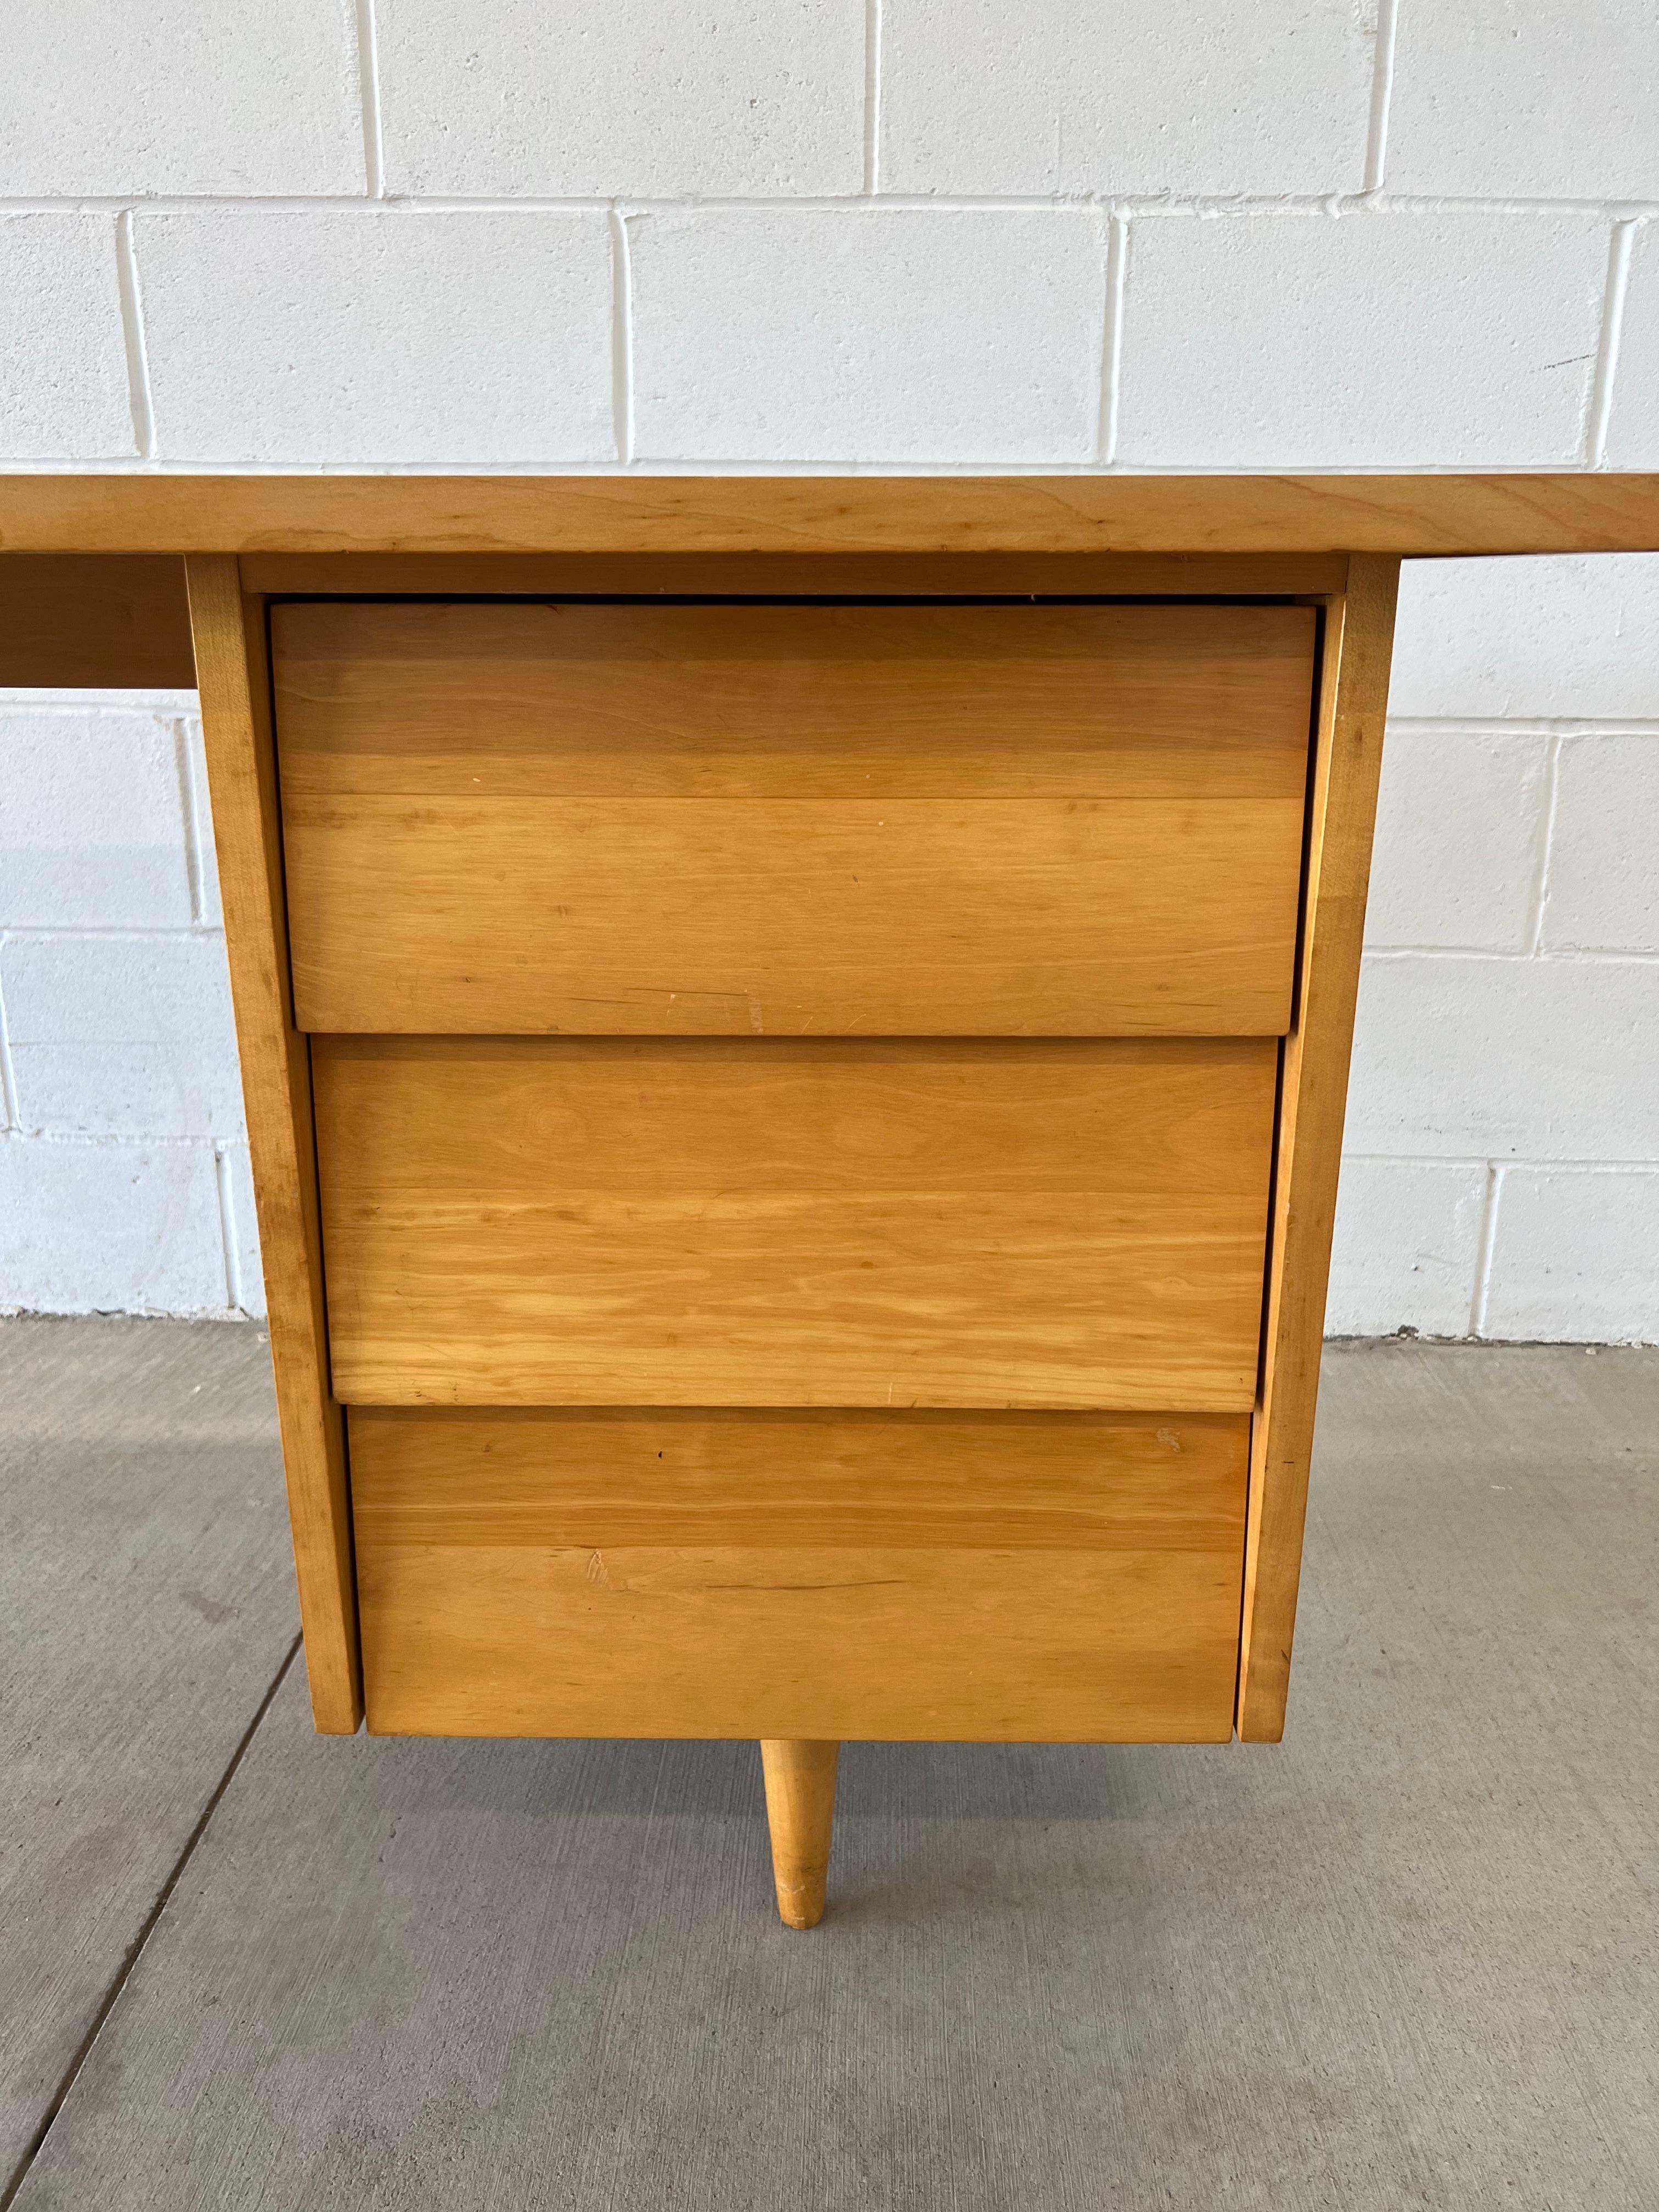 Florence Knoll Model 17 Desk In Good Condition For Sale In Saint Paul, MN